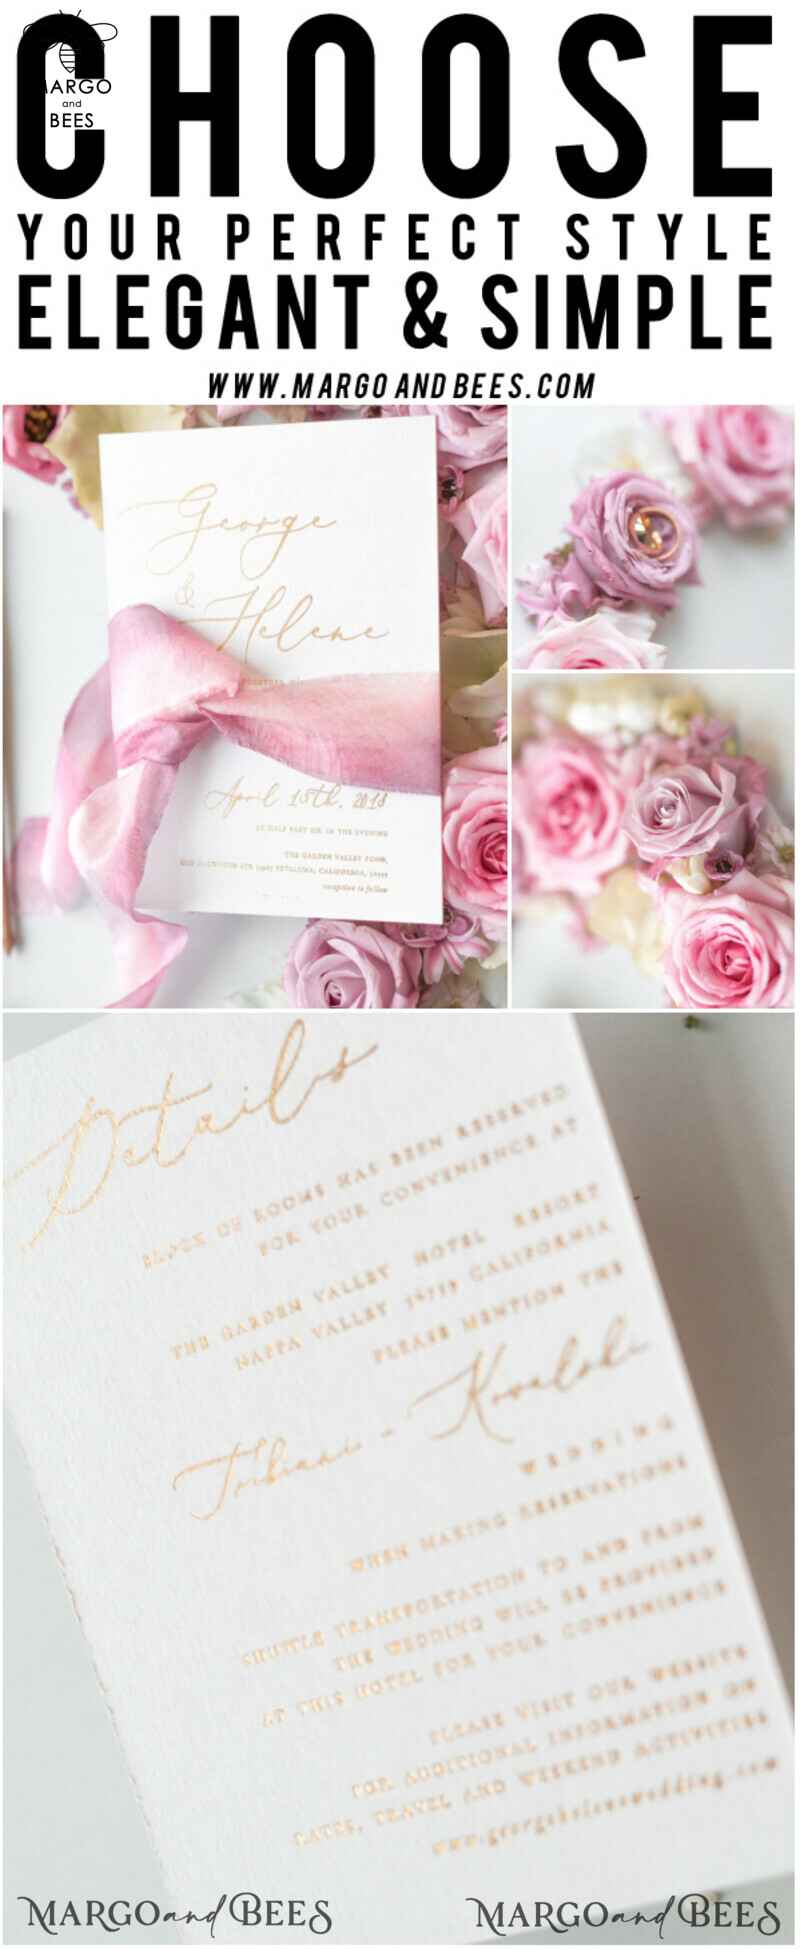 Romantic Blush Pink Wedding Invitations: Vintage Floral Wedding Invitation Suite with Elegant Wedding Cards and Hand Dyed Bow - Glamour Peony Wedding Stationery-43